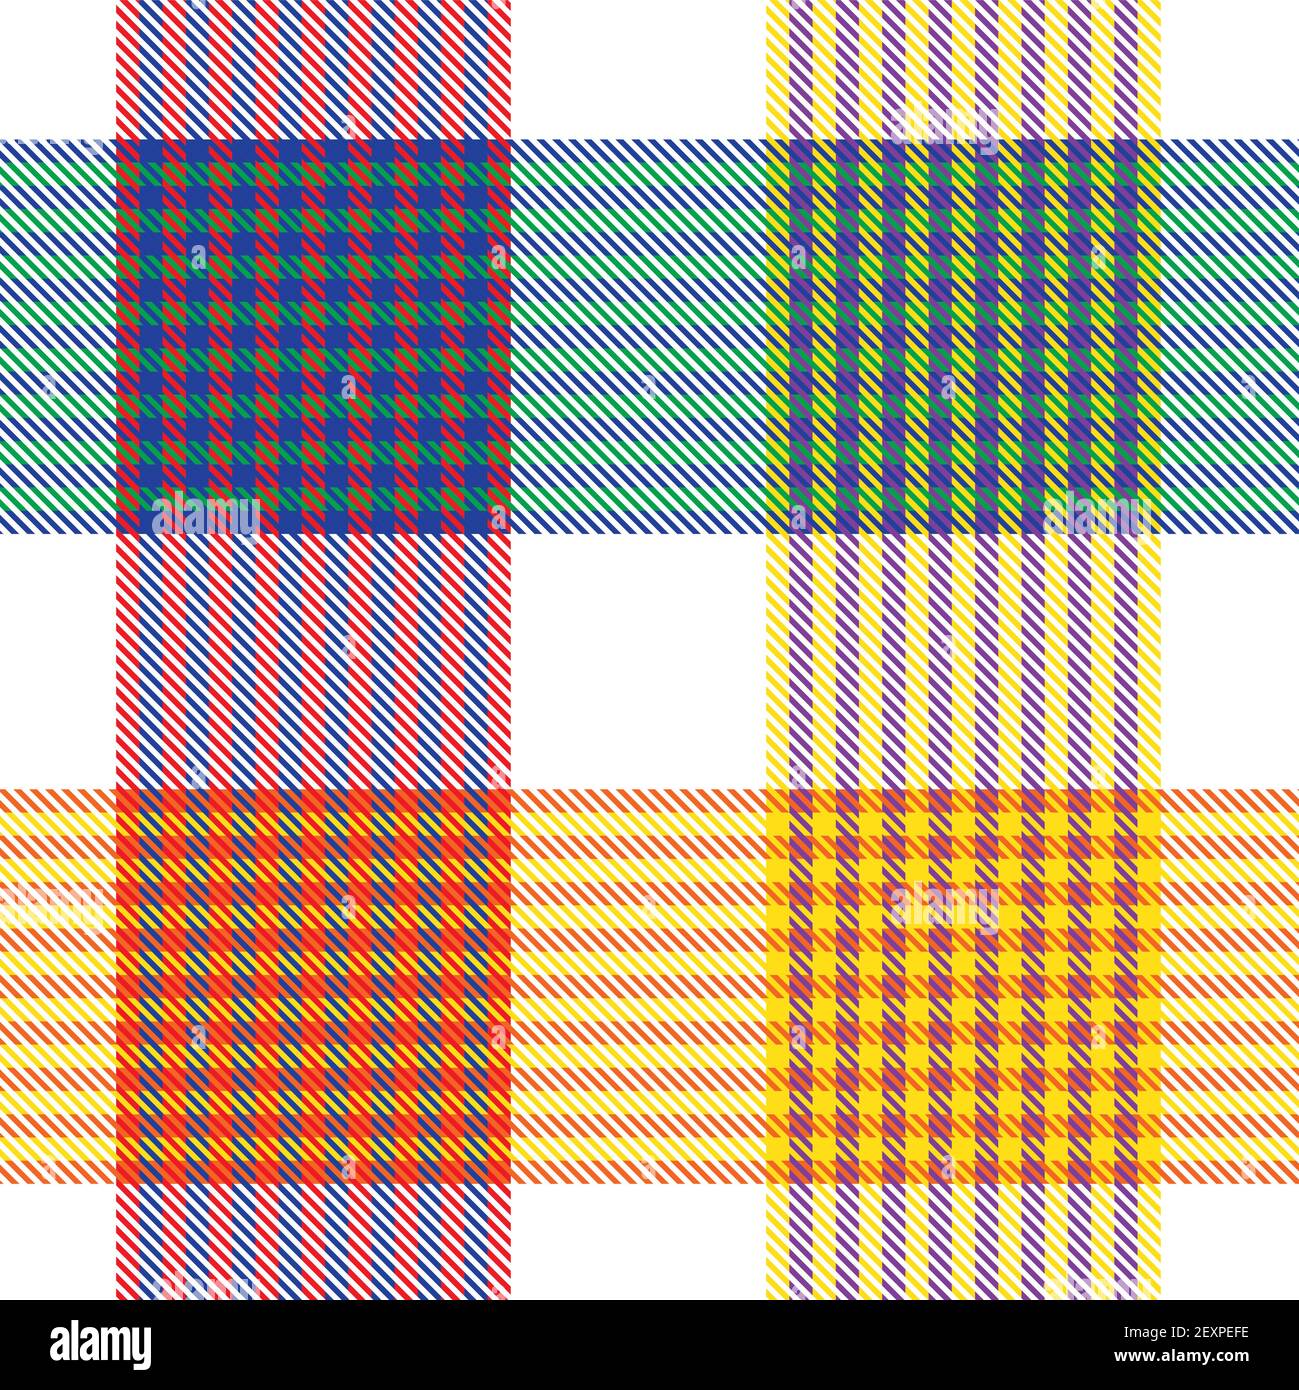 https://c8.alamy.com/comp/2EXPEFE/rainbow-plaid-checkered-tartan-seamless-pattern-suitable-for-fashion-textiles-and-graphics-2EXPEFE.jpg